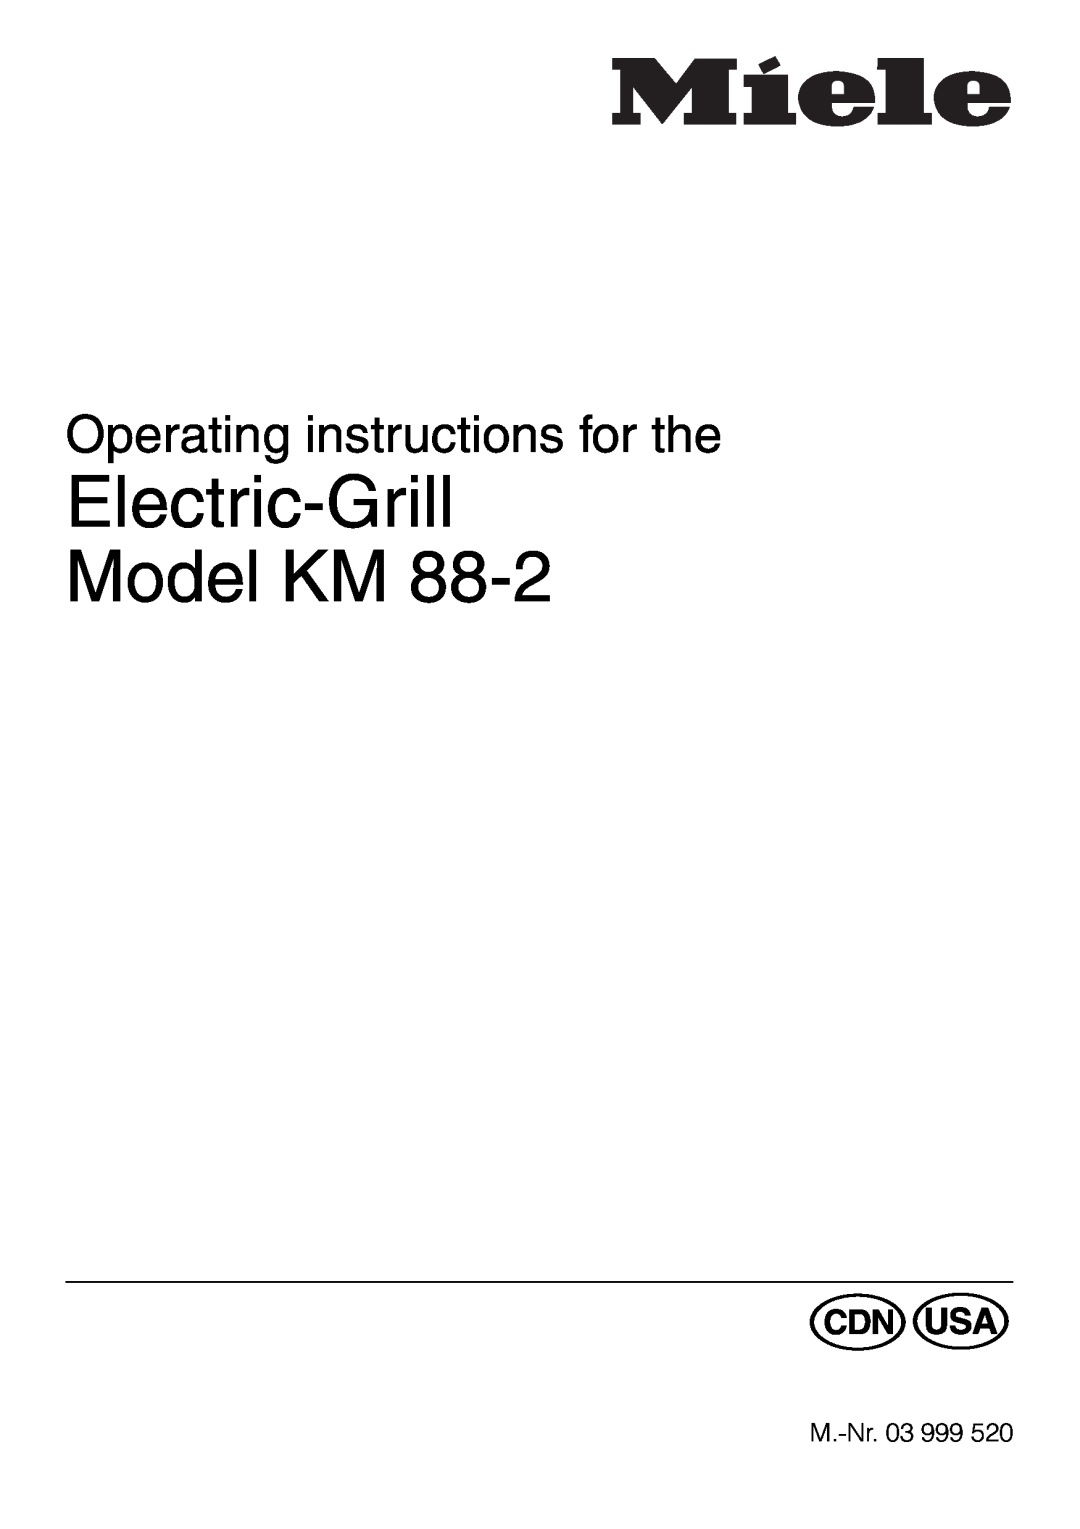 Miele KM88-2 operating instructions Electric-Grill Model KM, Operating instructions for the 